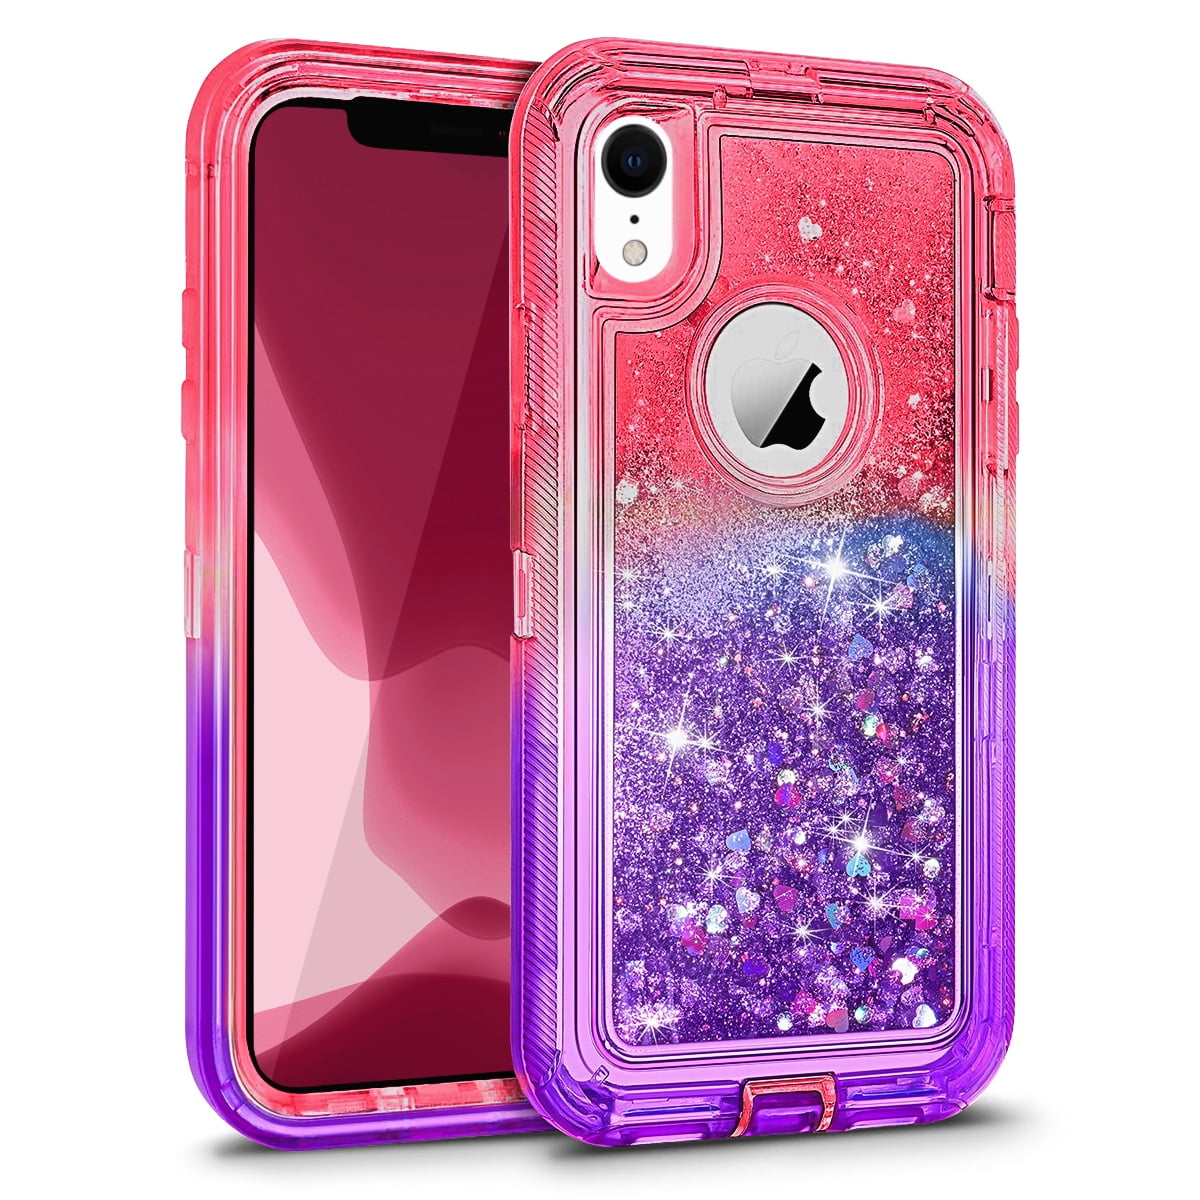 iPhone 8 Plus Case,iPhone 7 Plus Case,DUEDUE Glitter Bling Sparkly Cute  Phone Cover with Ring Kickstand Shockproof Soft TPU Slim Full Body  Protective